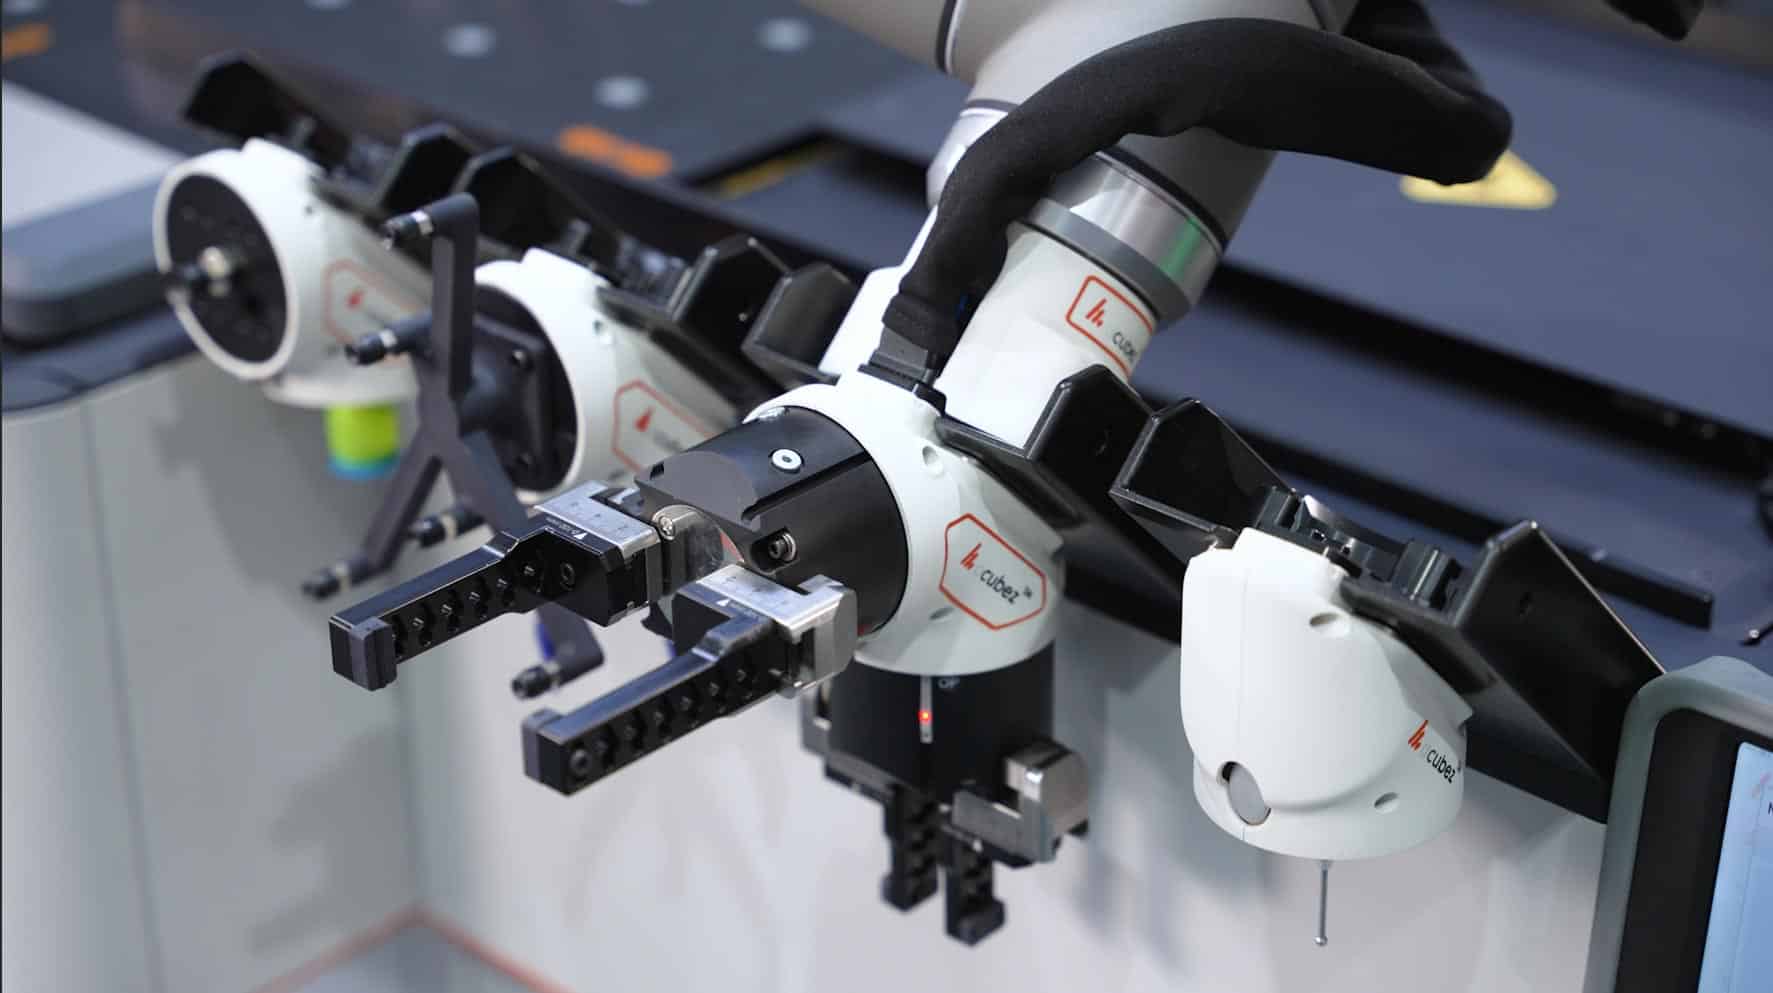 Automated tool changer, acubez™ GripperCube, holding up to 4 end of arm tooling (probe, vaccum gripper, 2-finger gripper, 3 finger gripper – compatible with UR cobot arm)